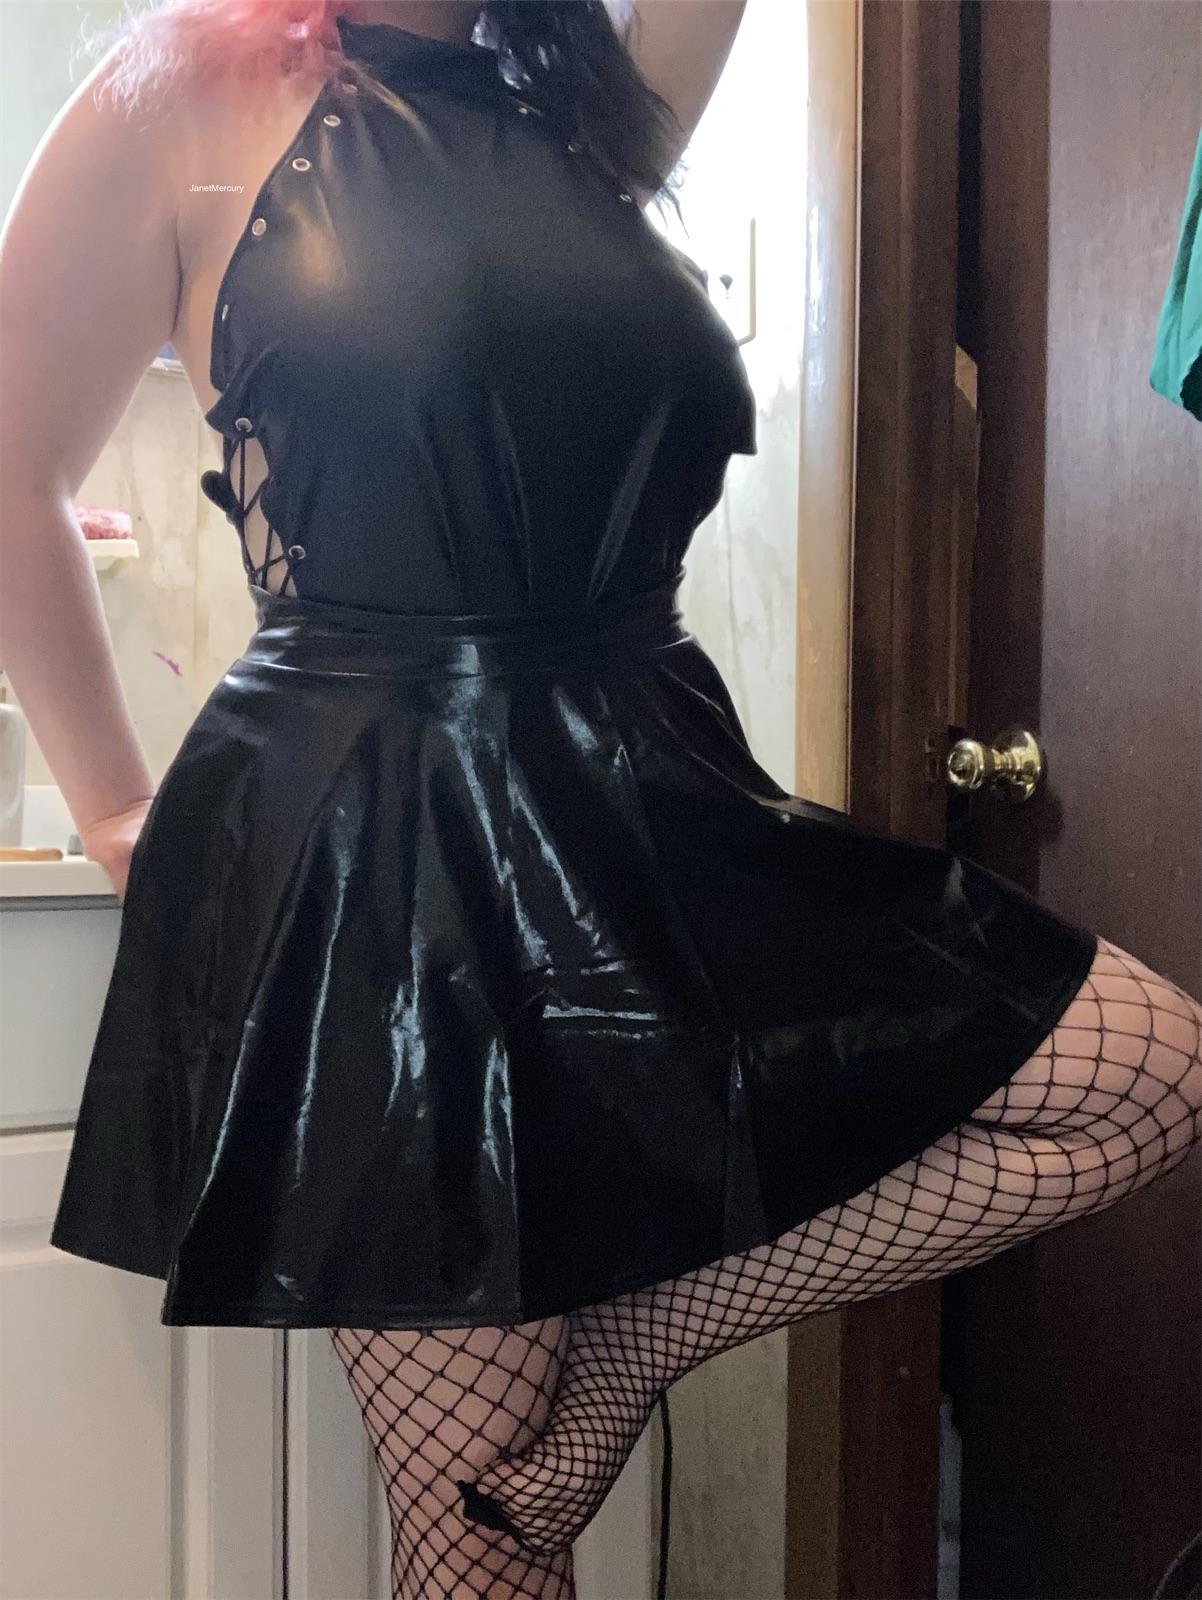 More Pics In My Shiny Fit